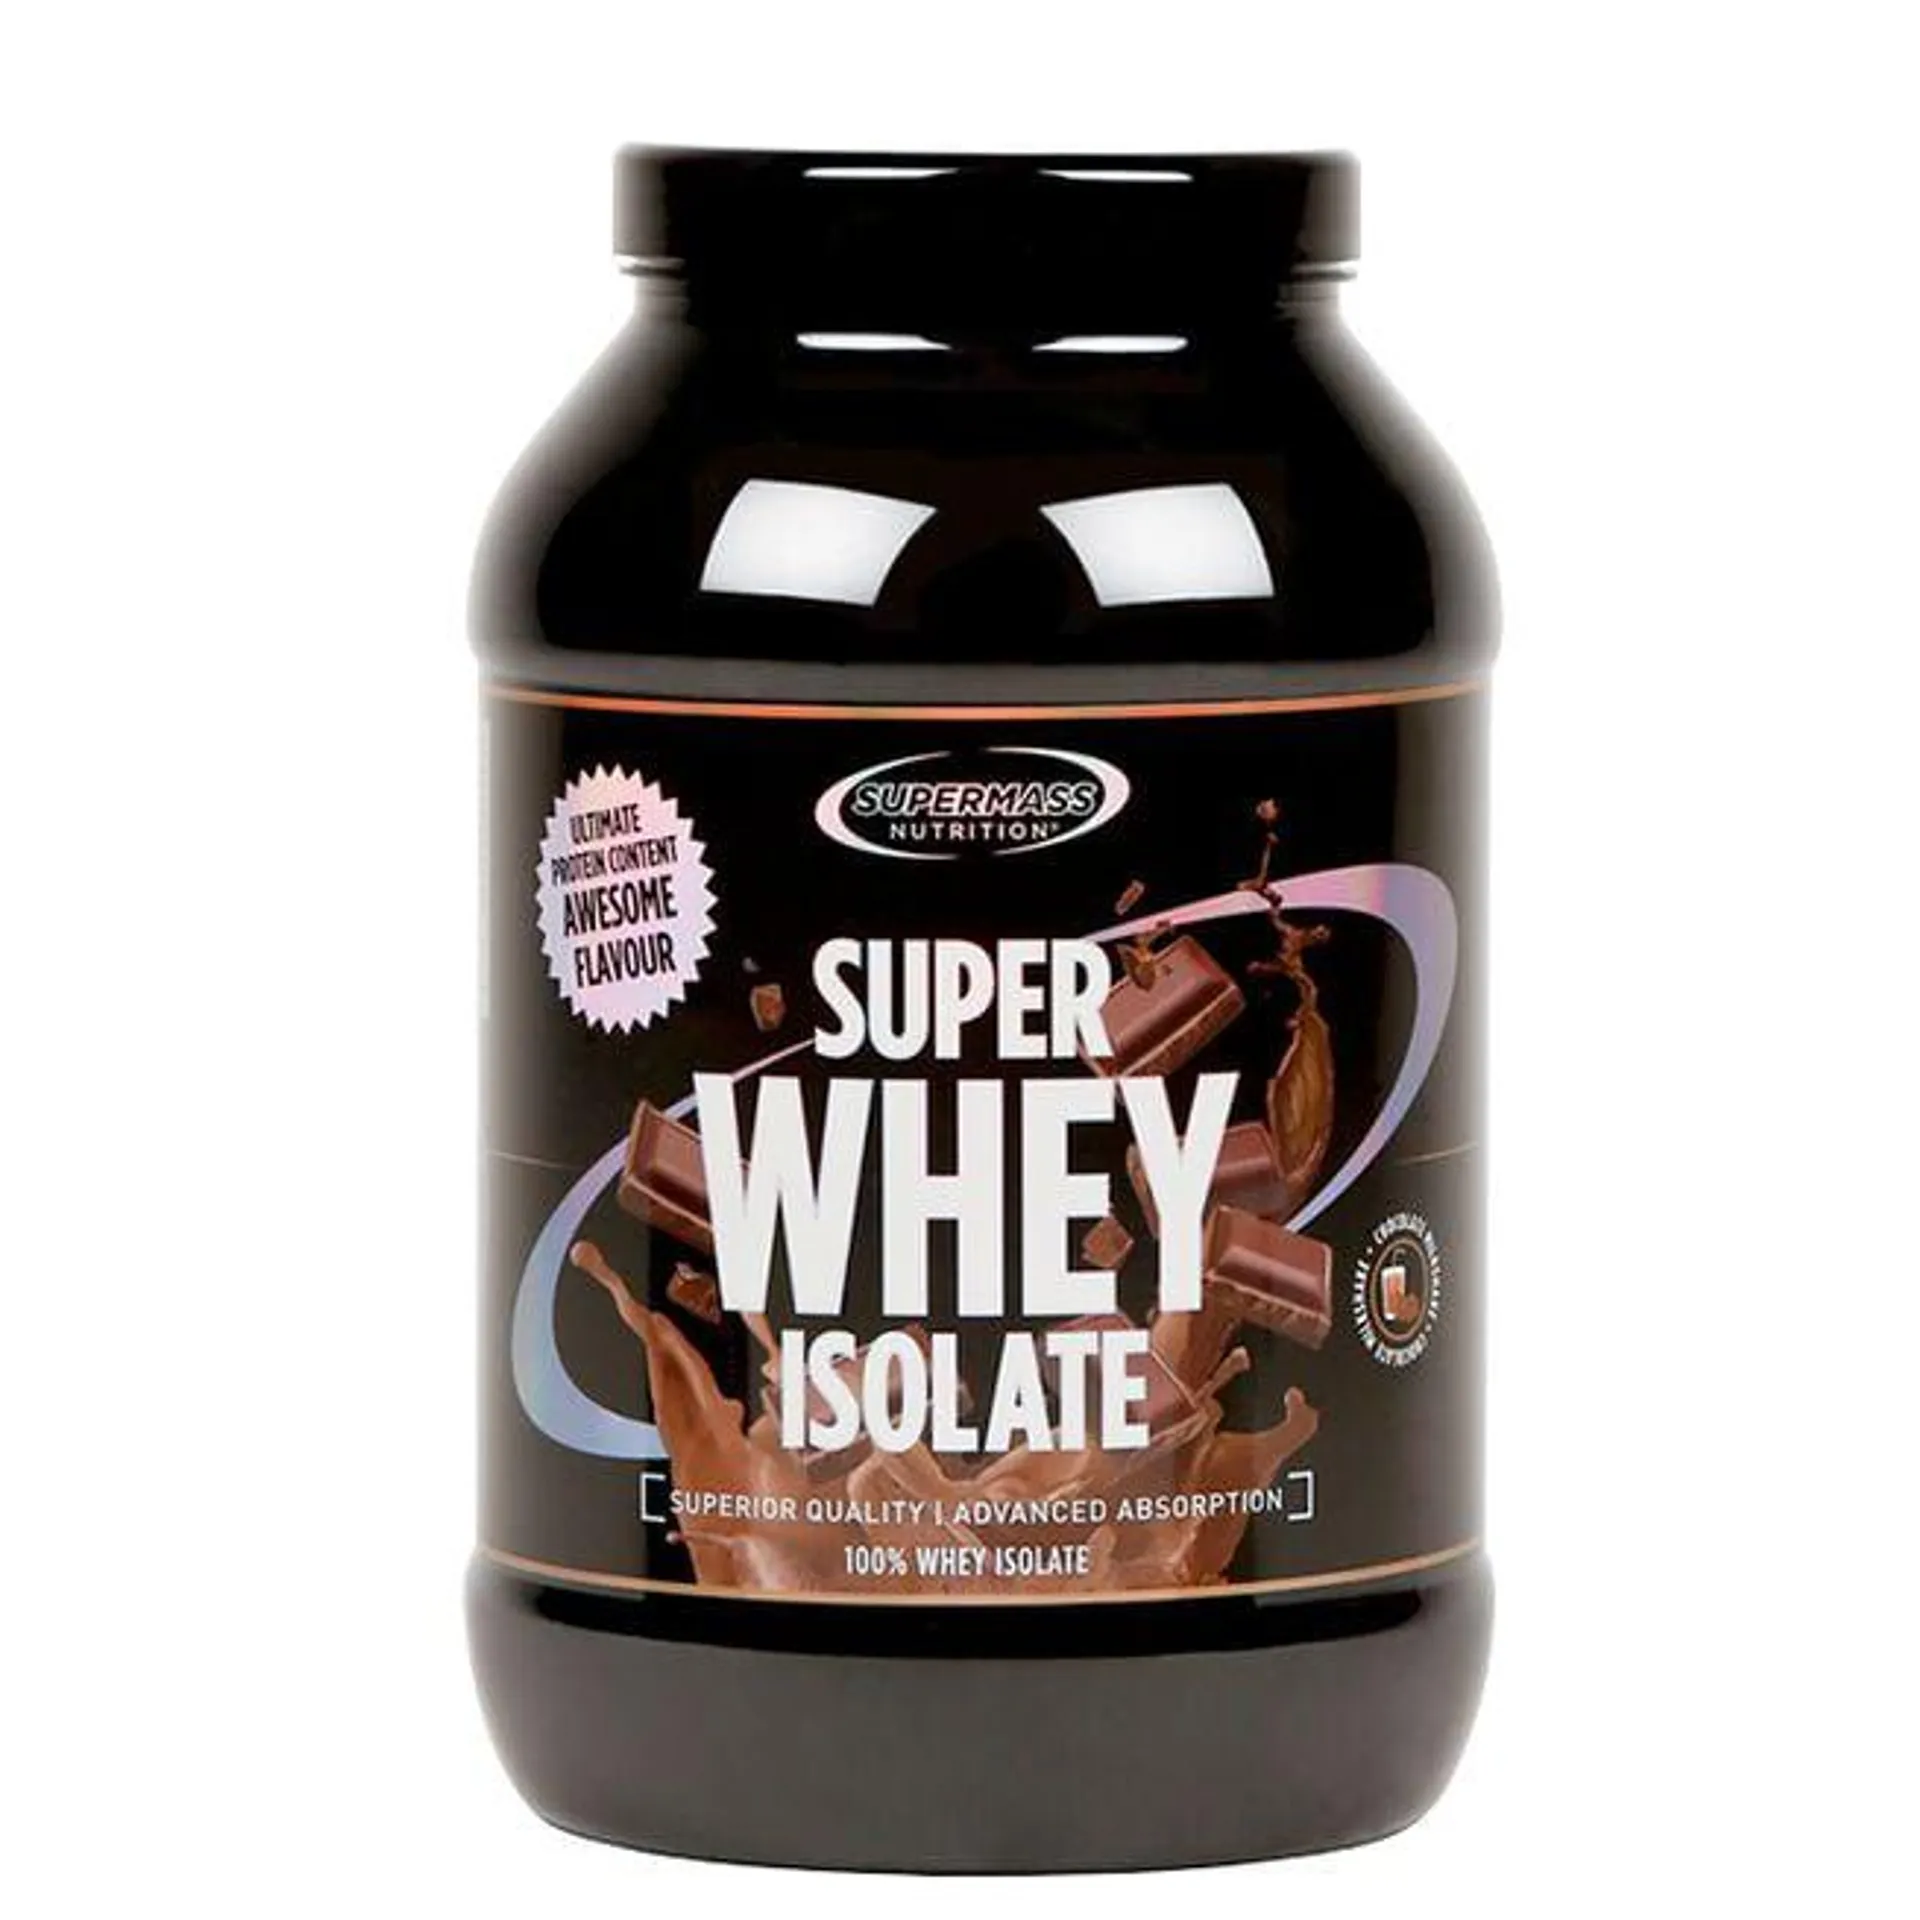 SUPER WHEY ISOLATE, 1300 g